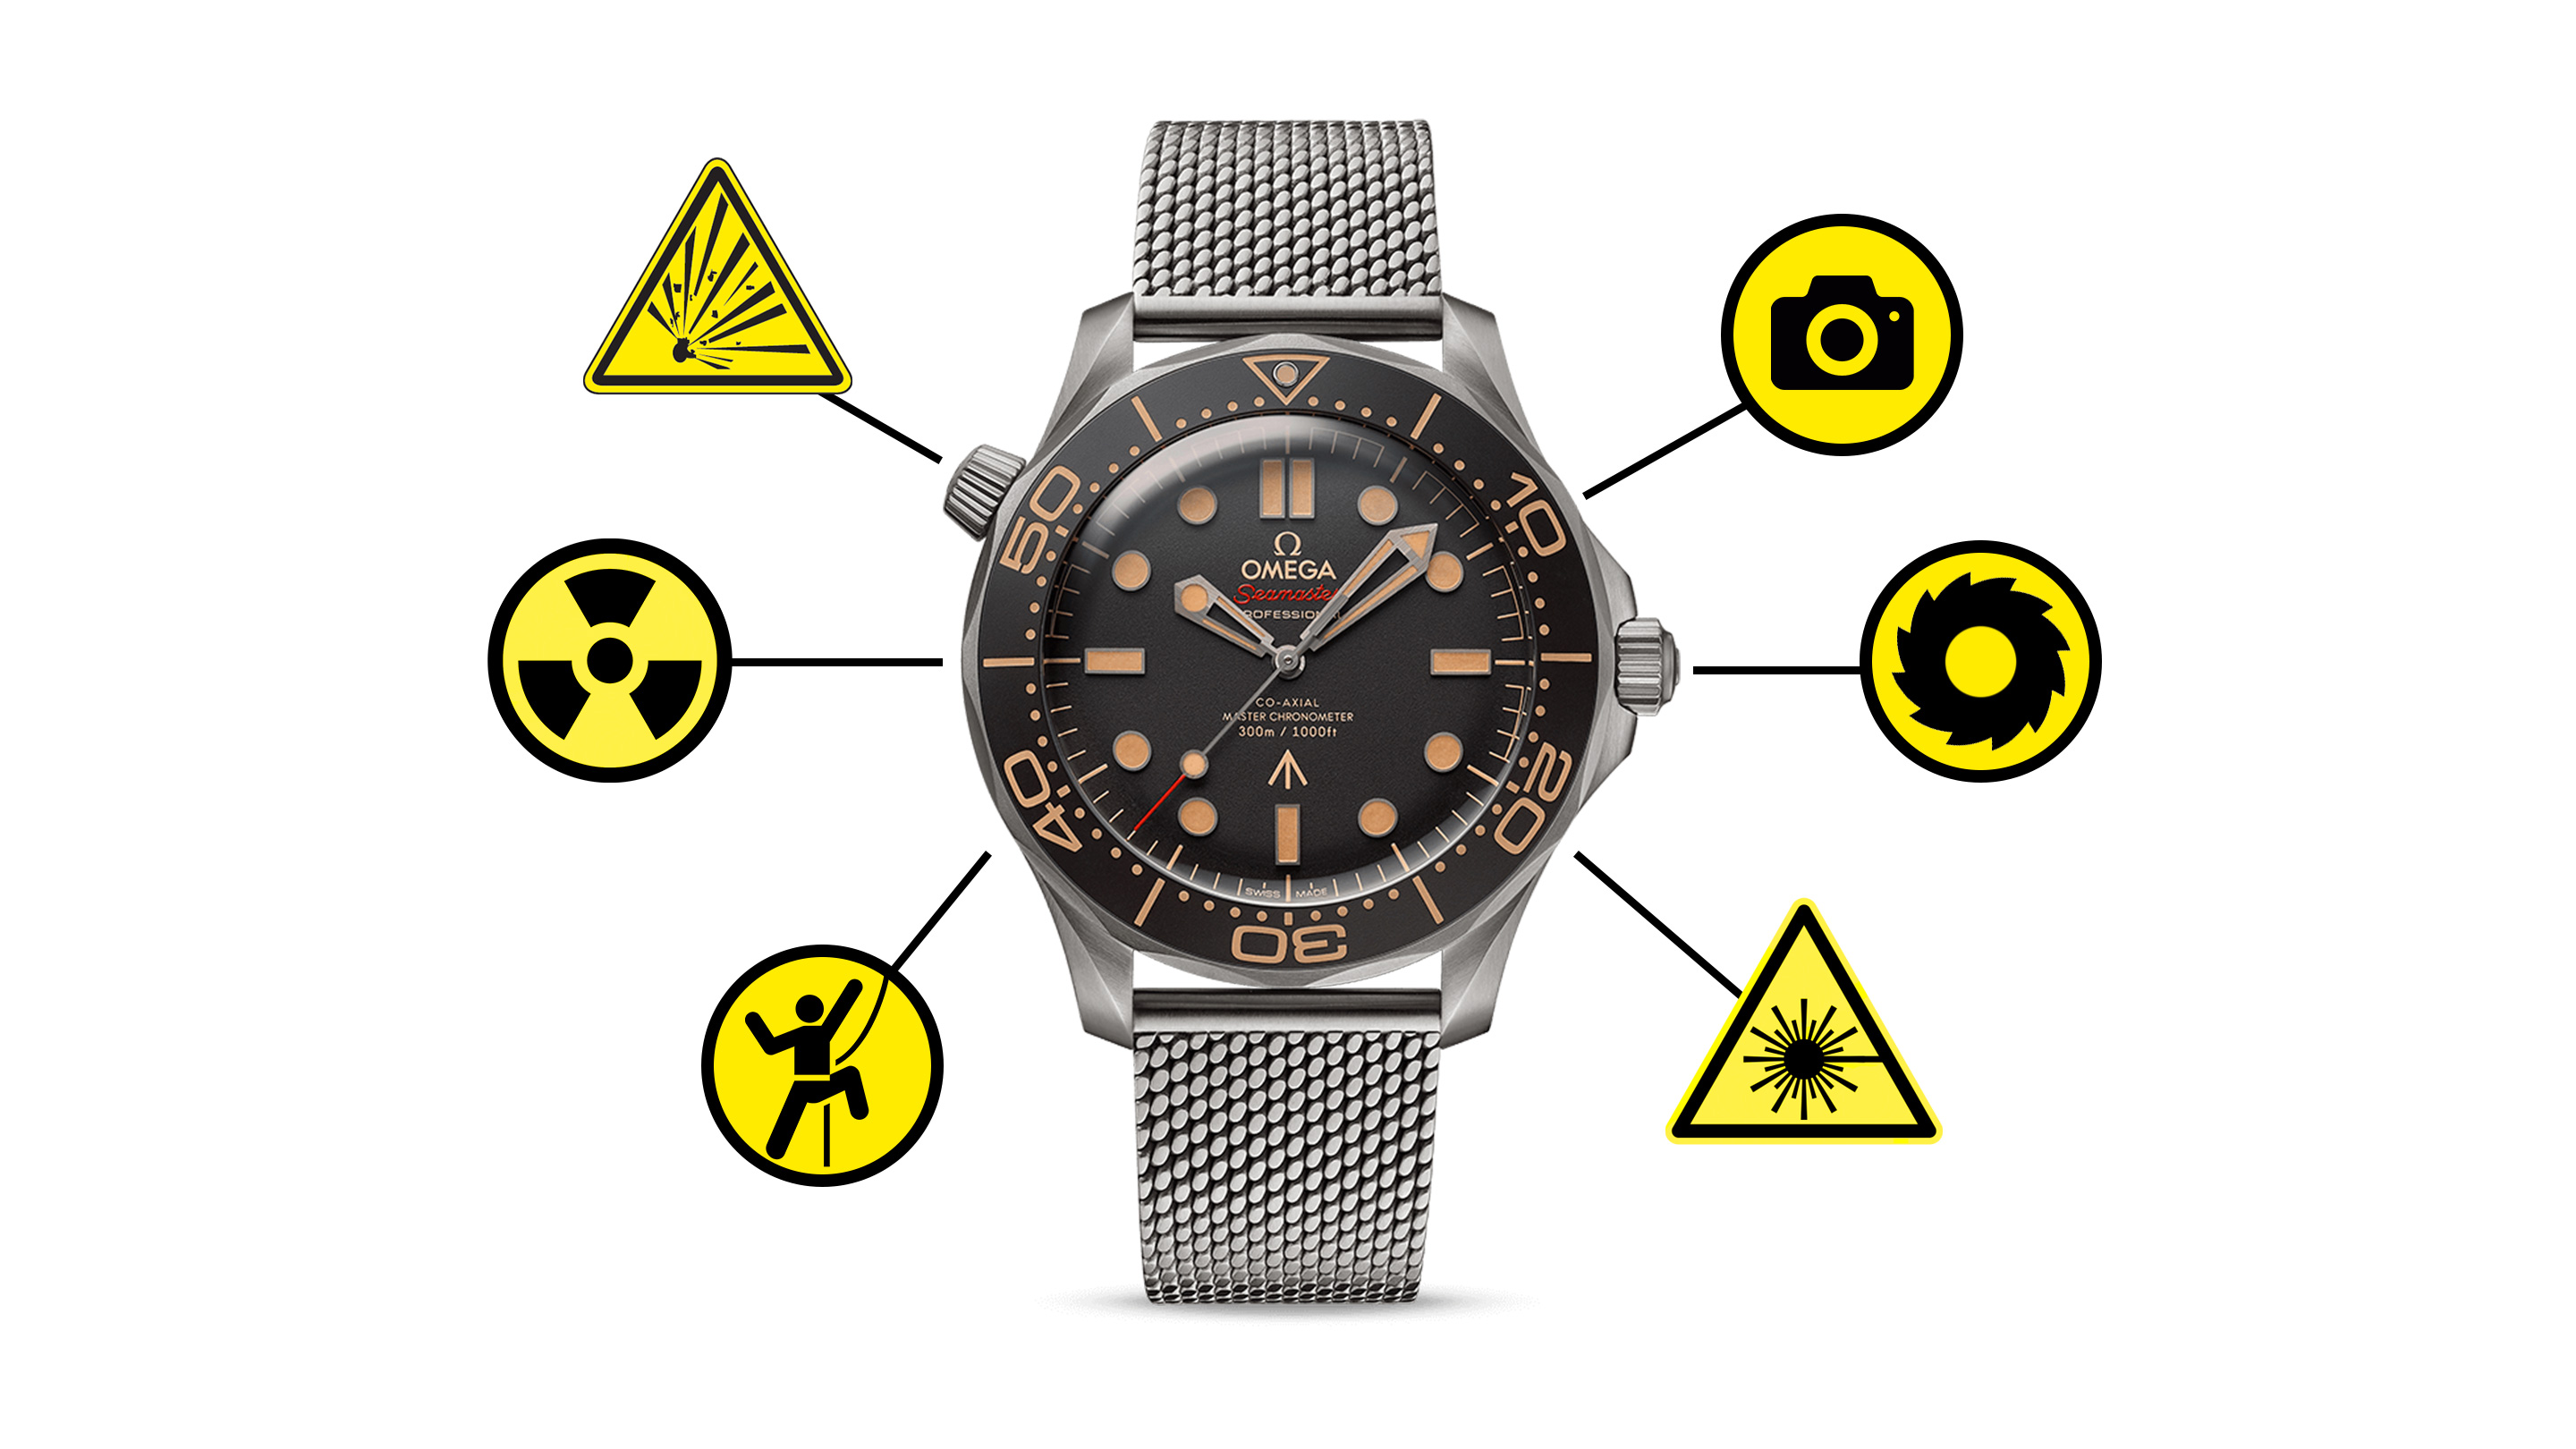 watches used in james bond movies